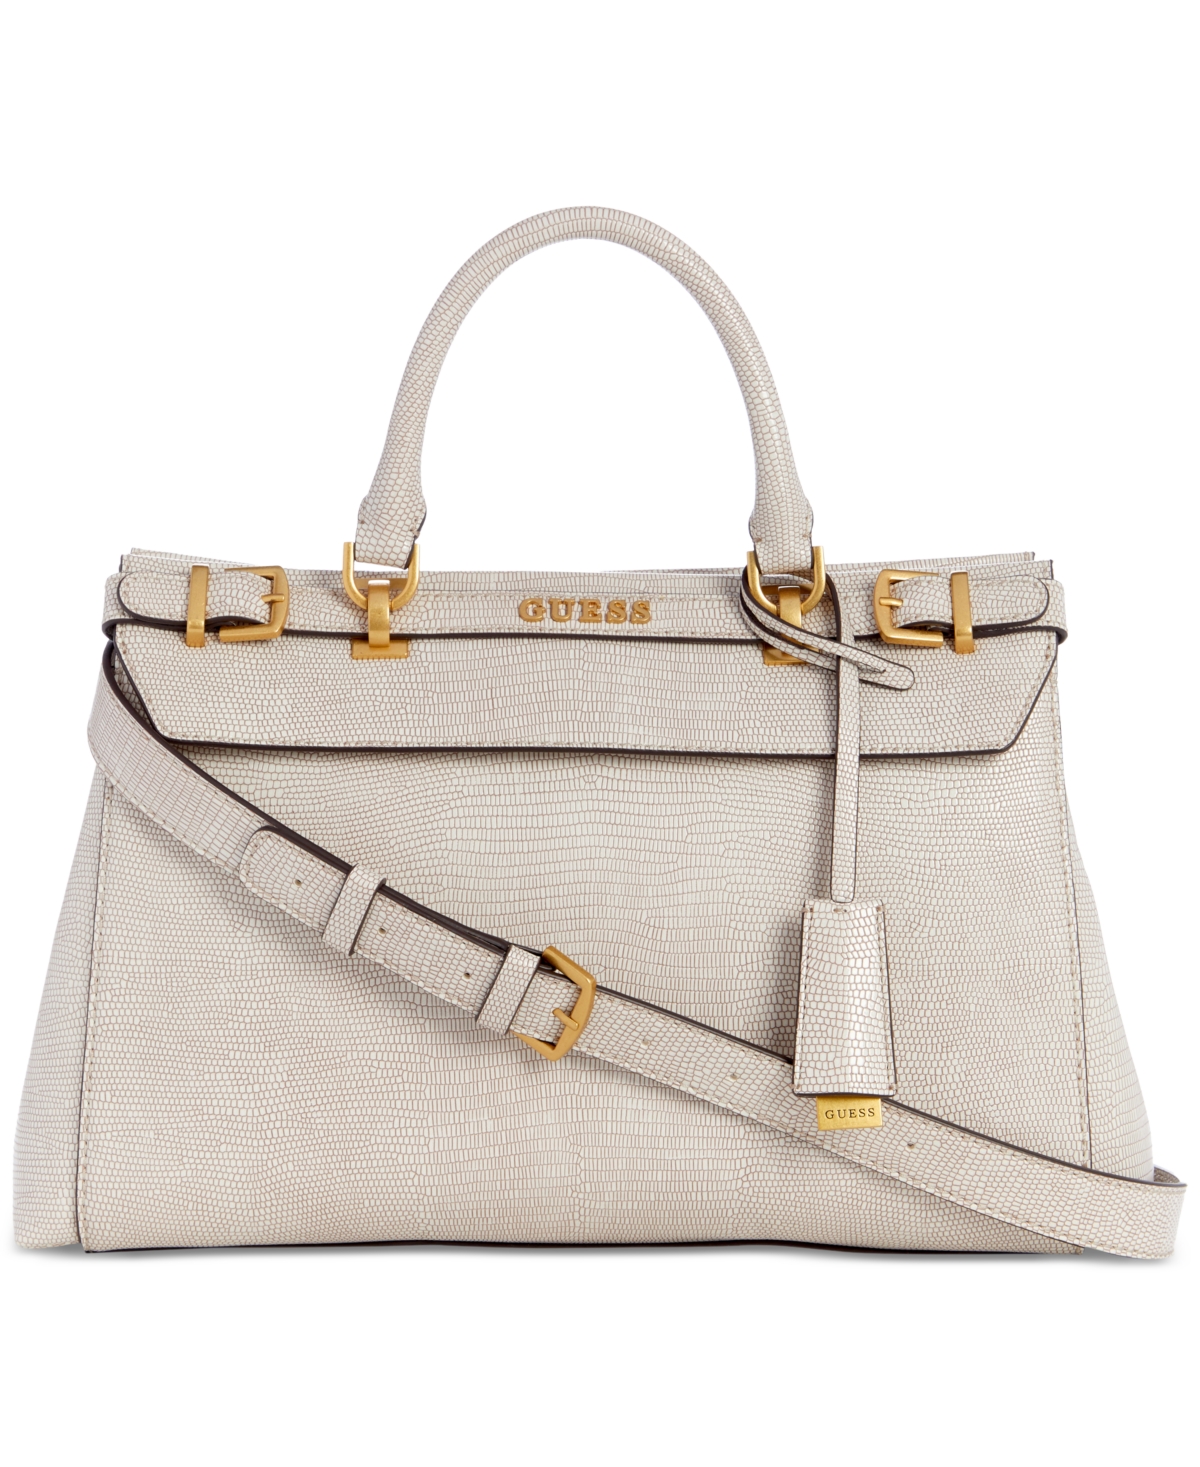 Guess Sestri Luxury Satchel In Taupe